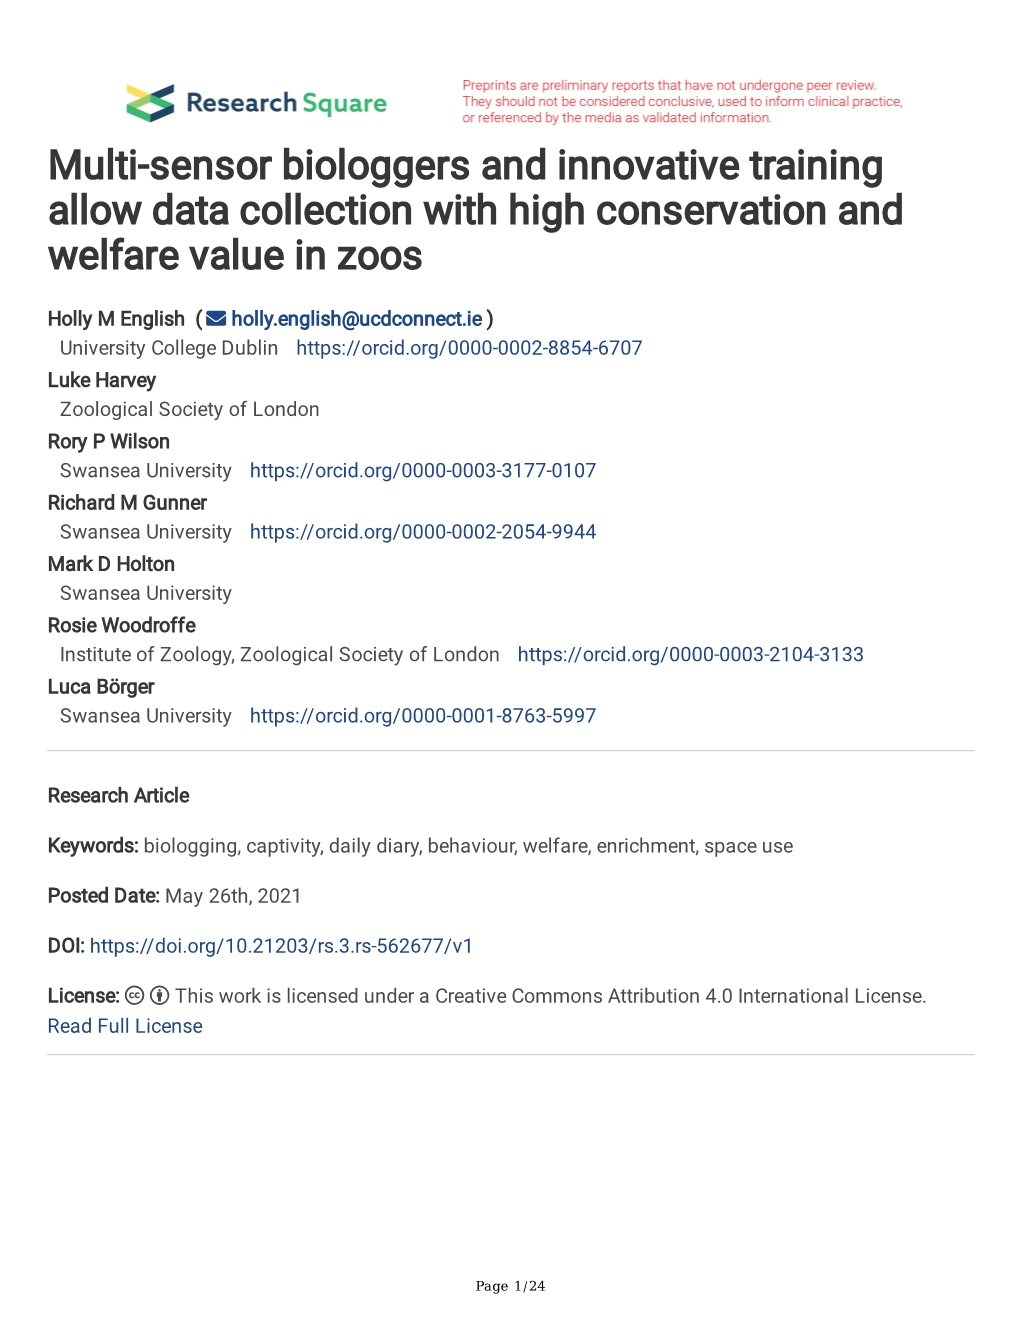 Multi-Sensor Biologgers and Innovative Training Allow Data Collection with High Conservation and Welfare Value in Zoos